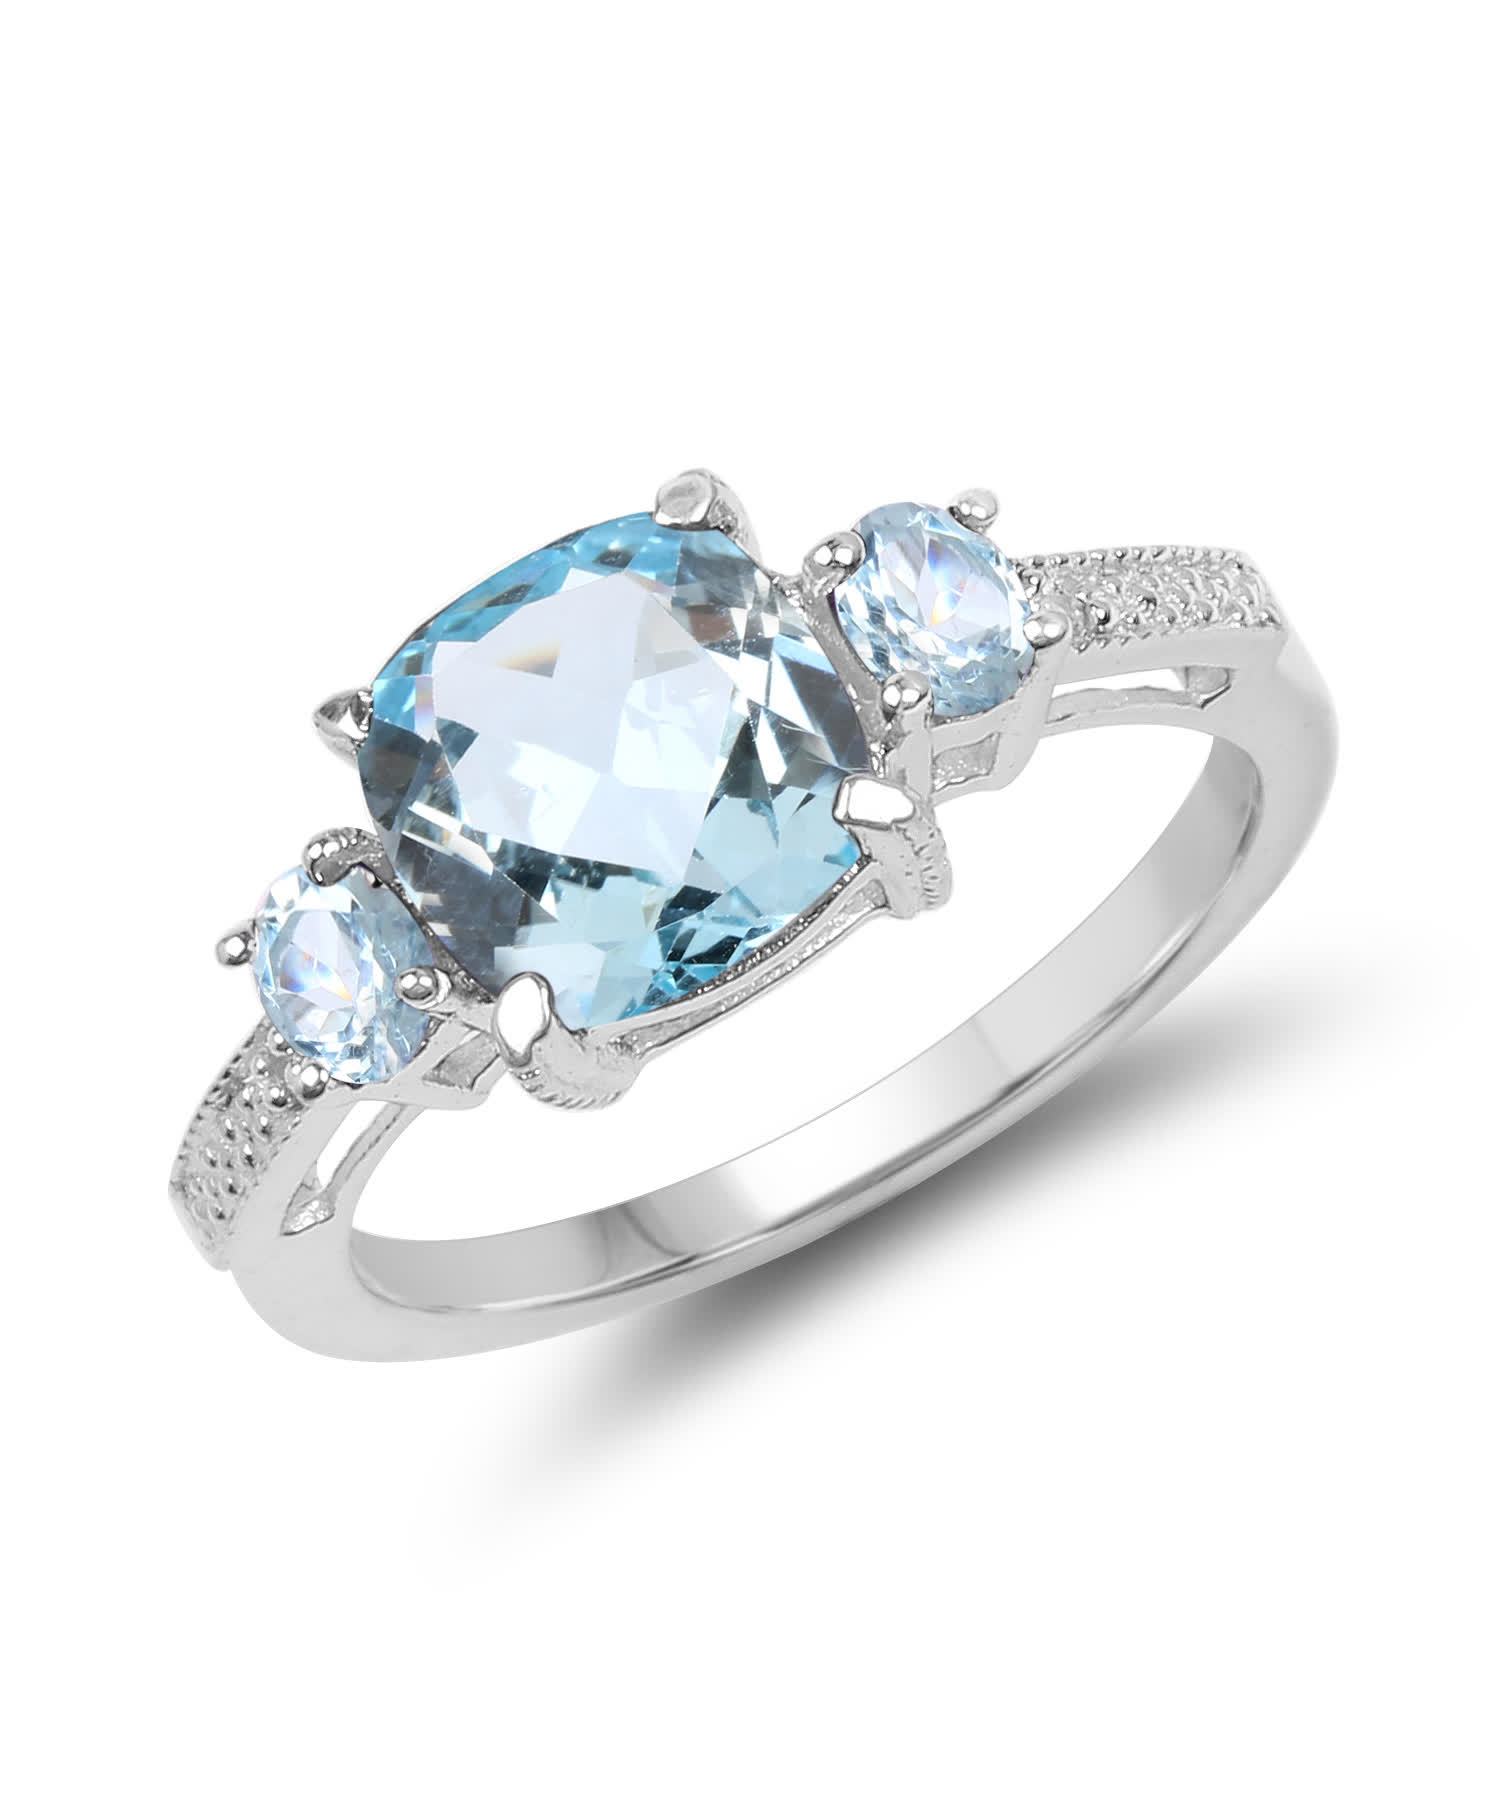 2.91ctw Natural Sky Blue Topaz Rhodium Plated 925 Sterling Silver Three-Stone Ring View 1